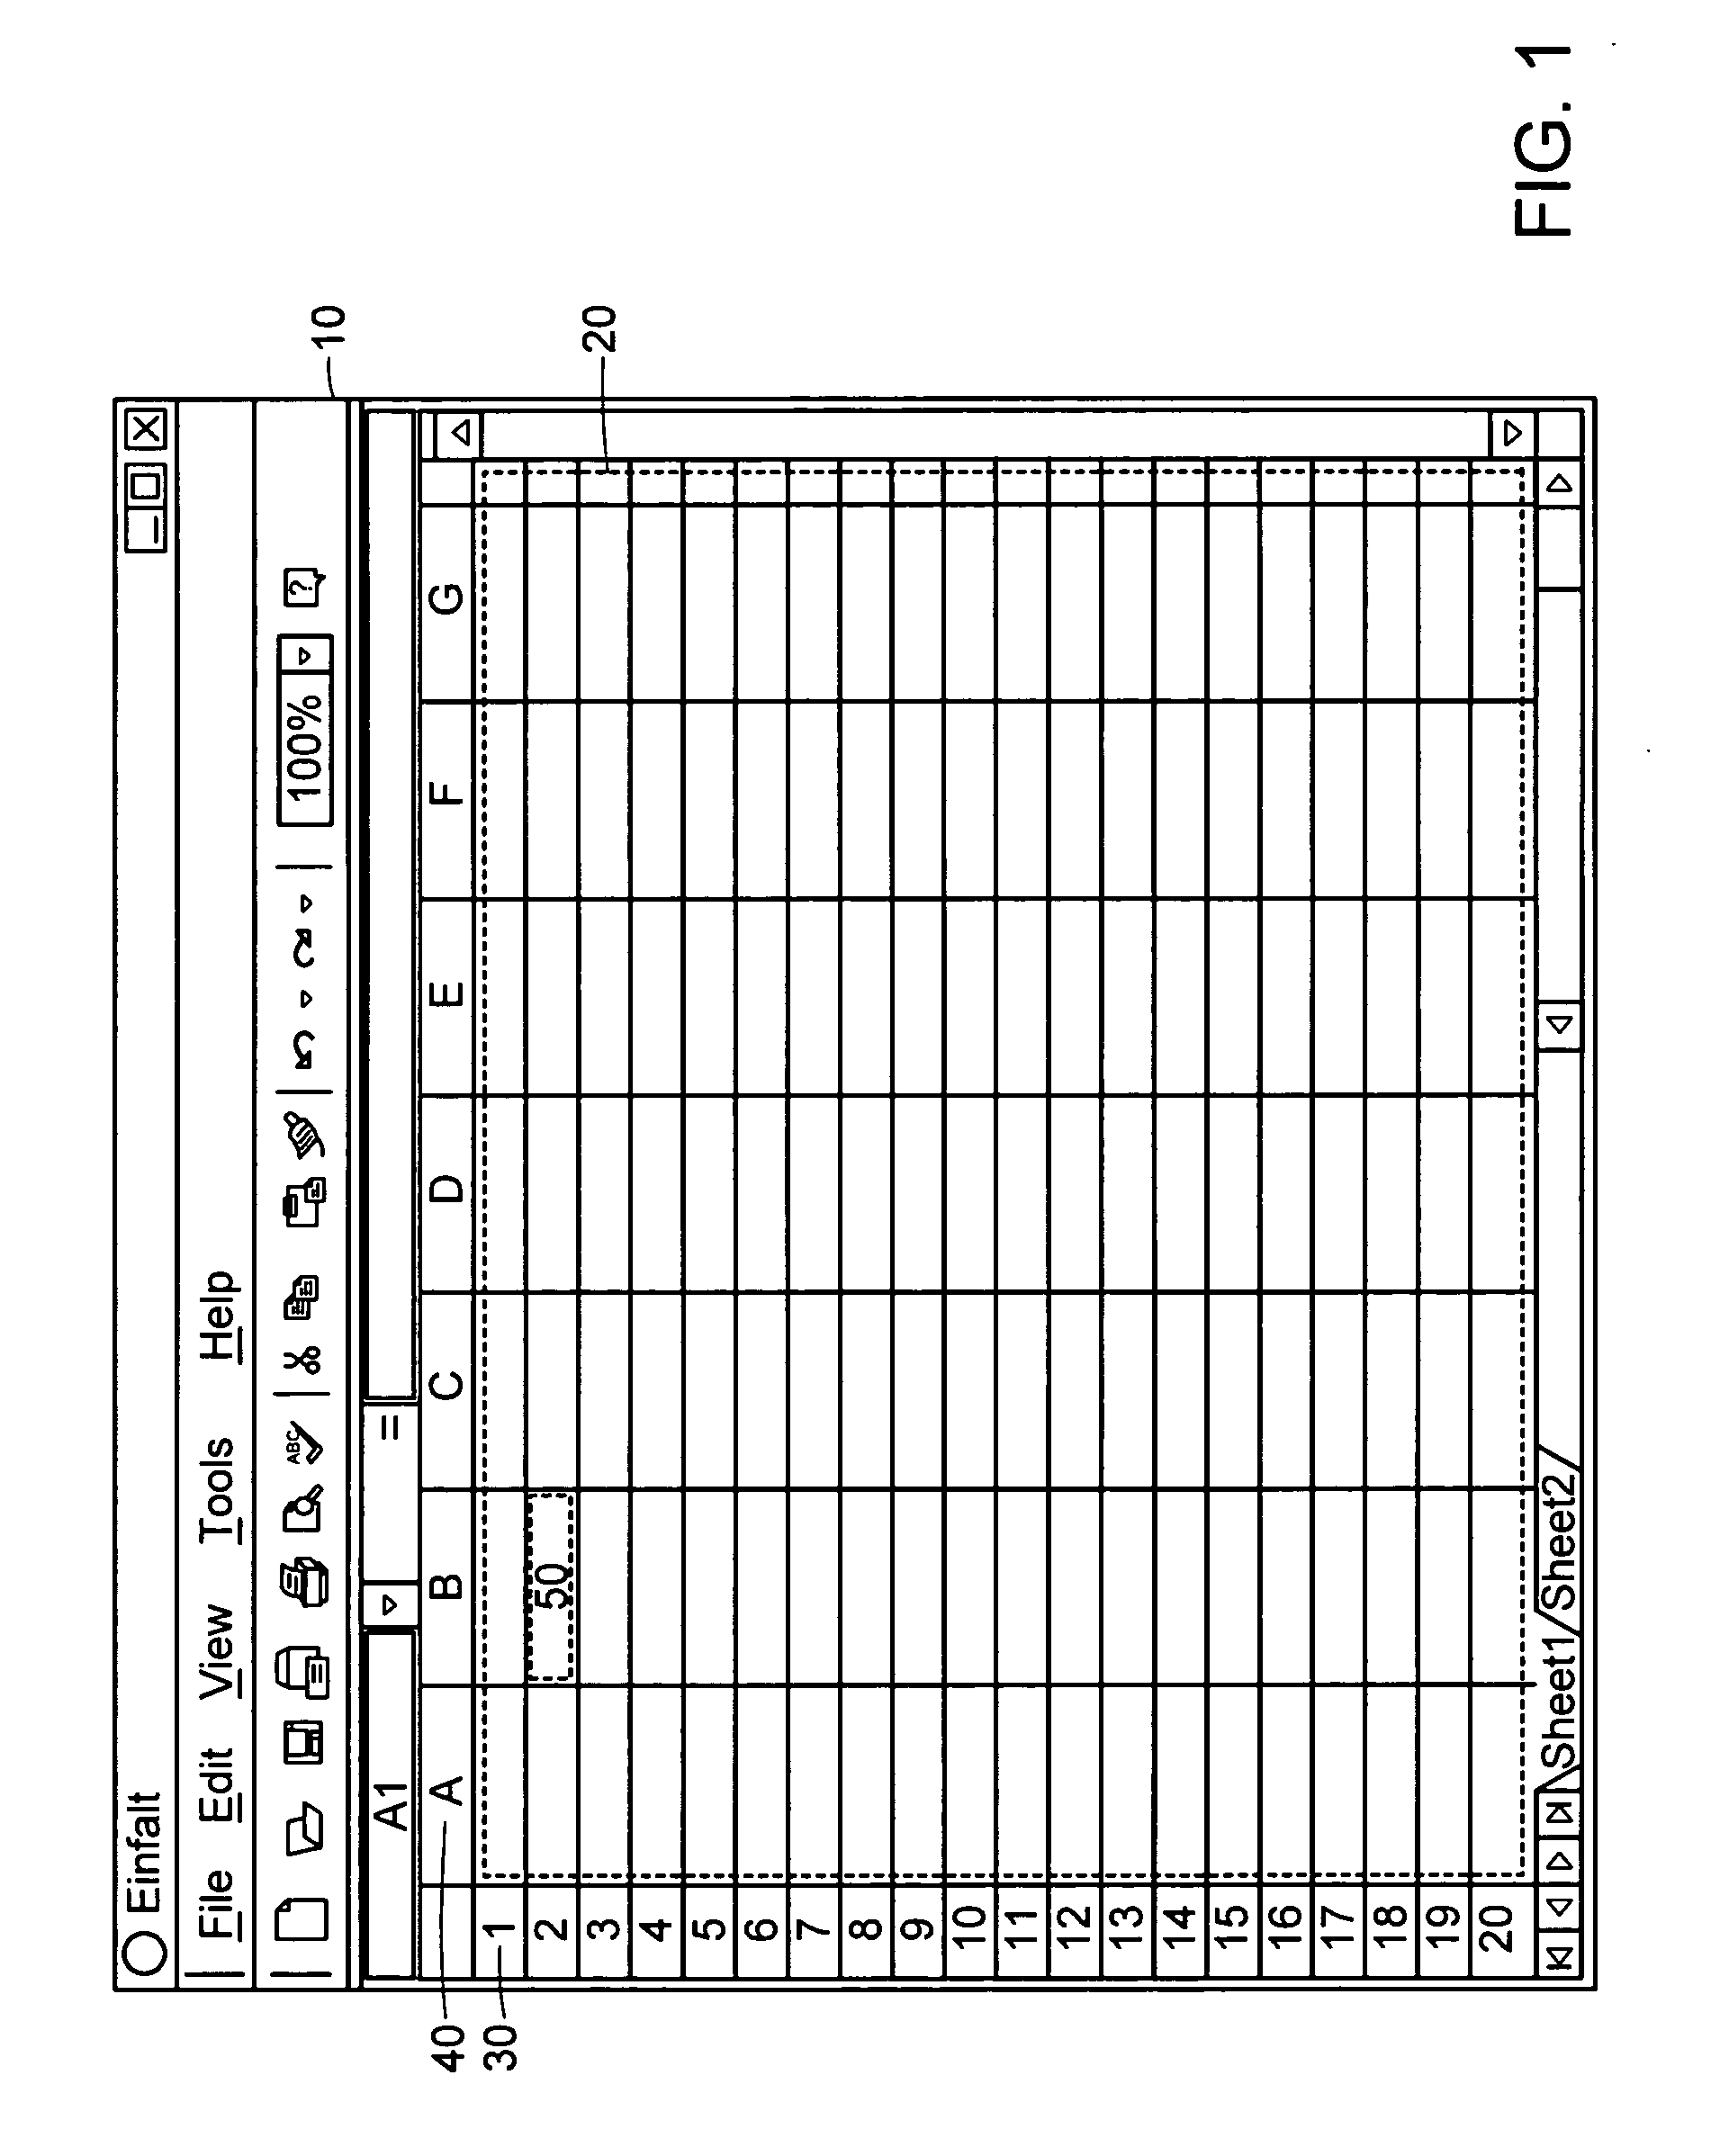 Visual programming system and method